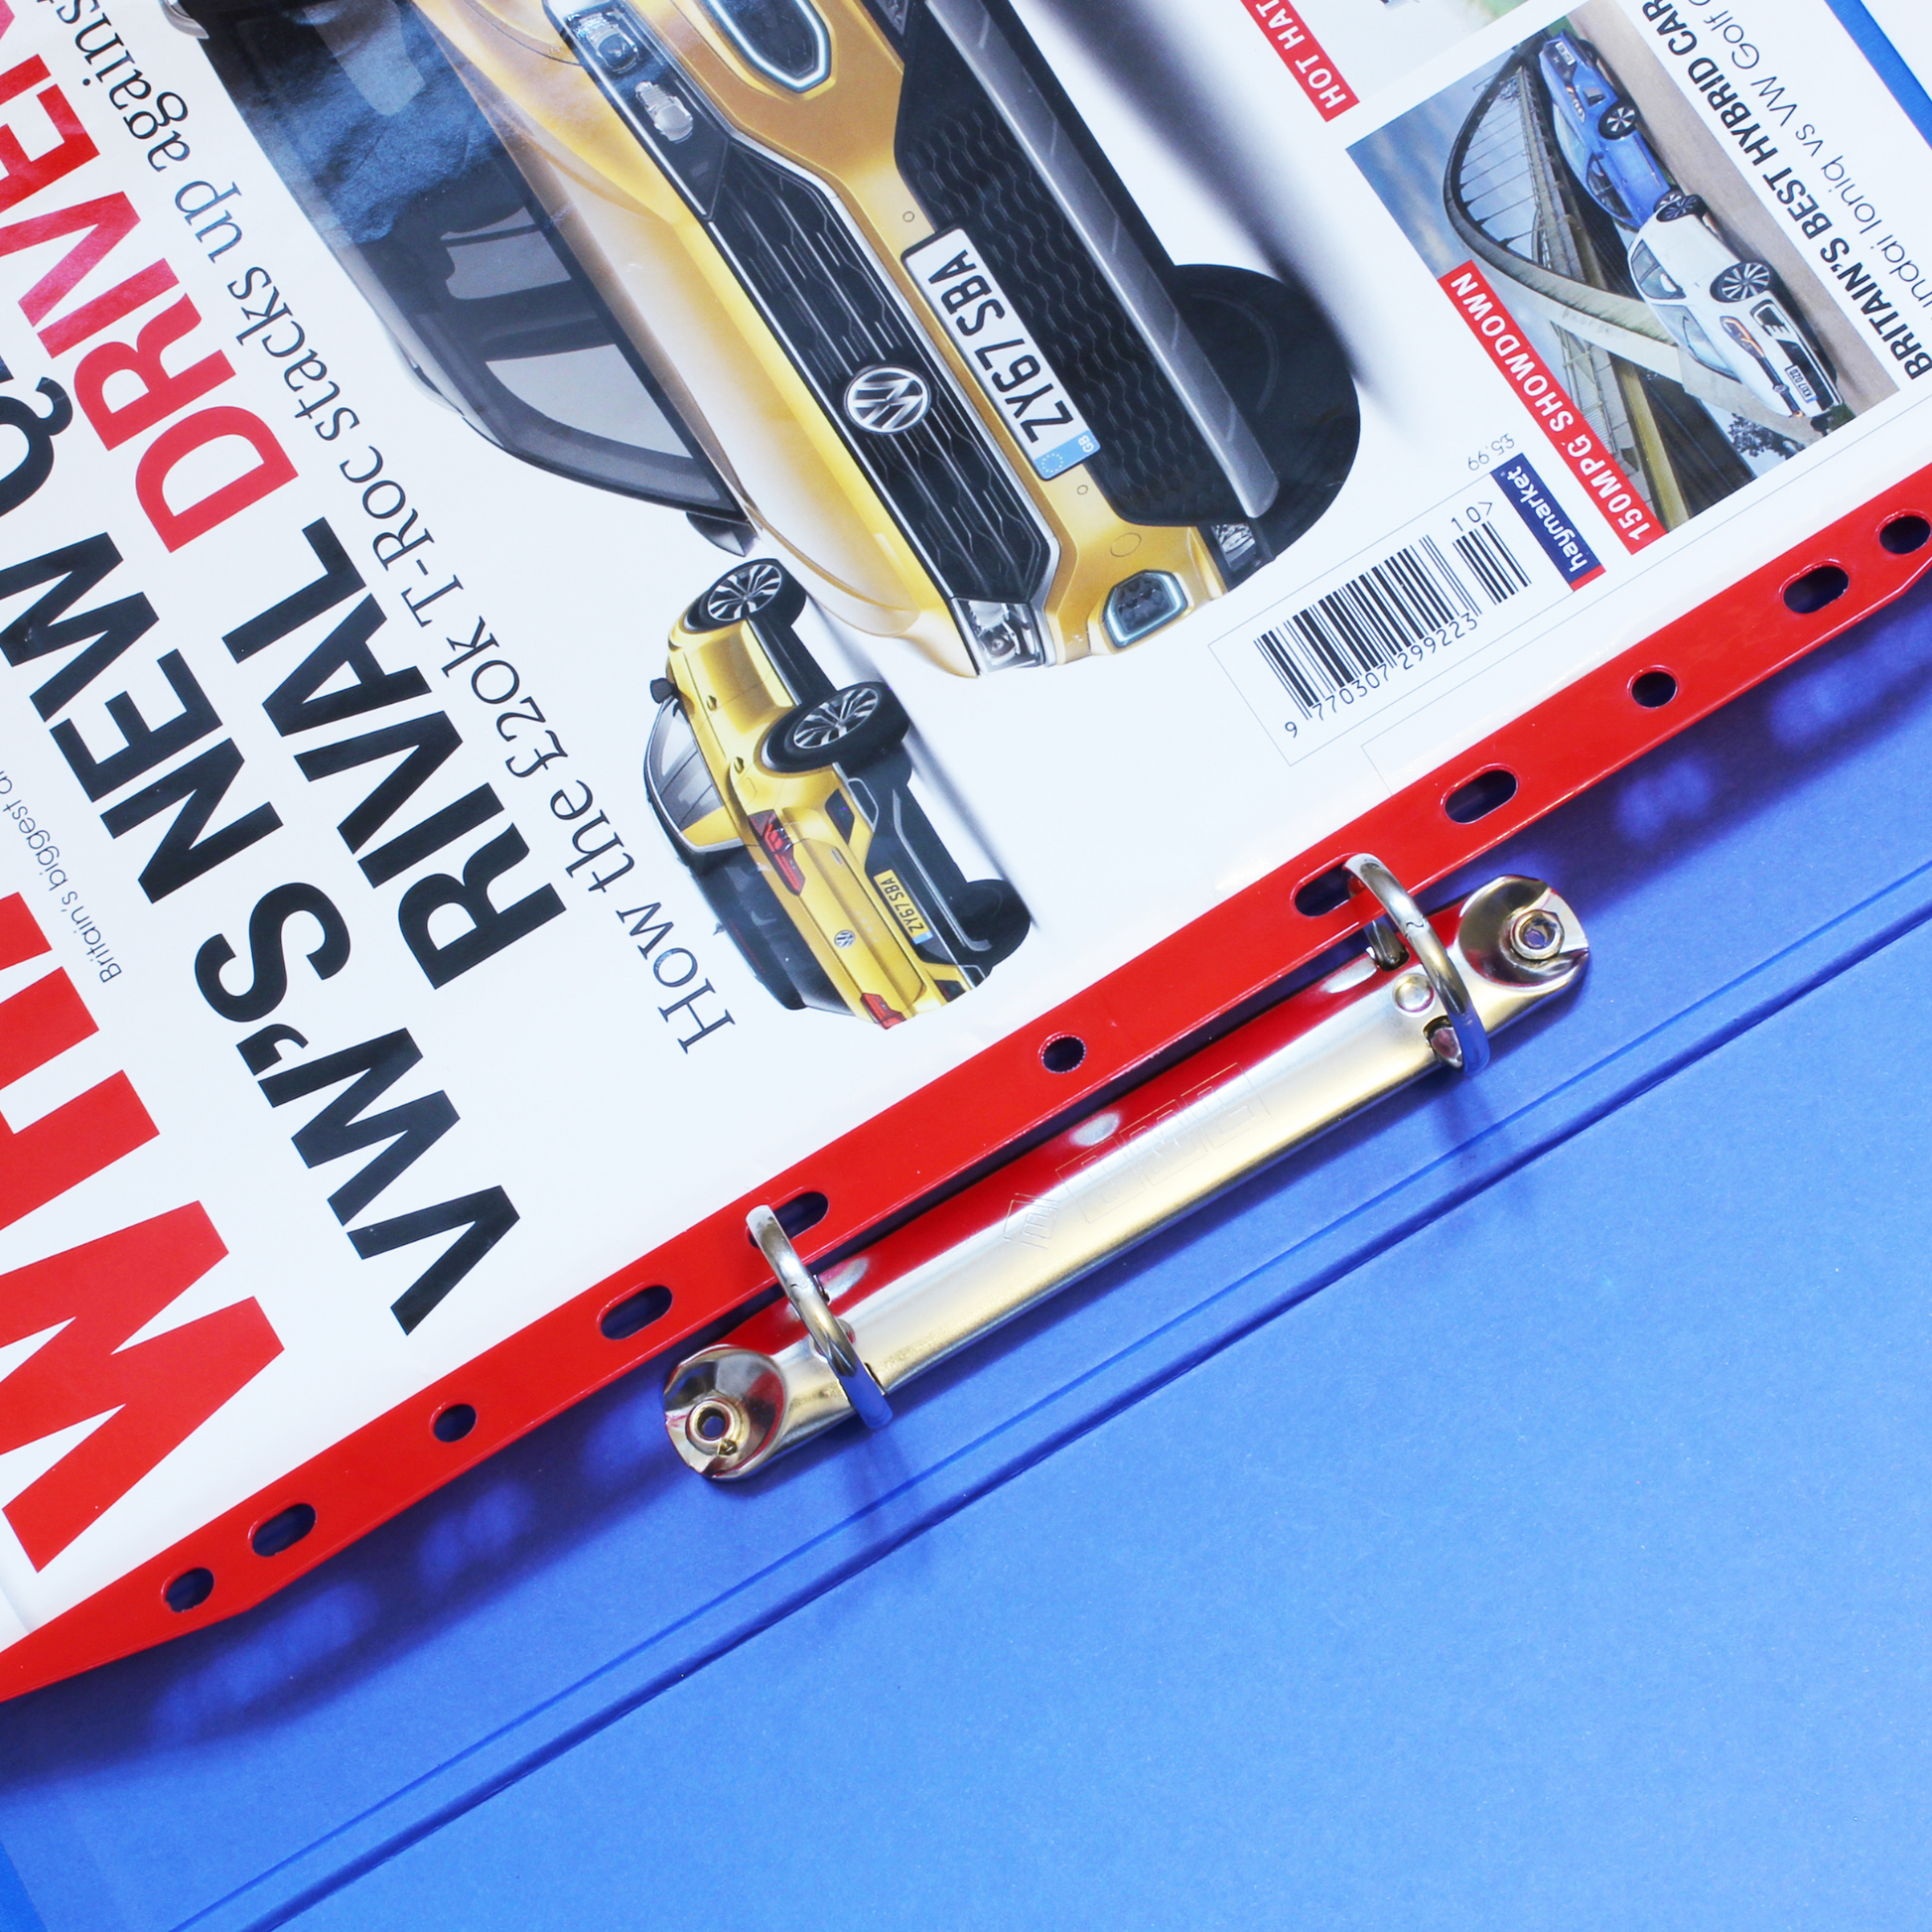 A close-up of a red Magi Clip multi-punched magazine storage clip, in situ in a ring binder, holding an issue of 'WHAT CAR?' magazine, showcasing a yellow sports car on the cover.